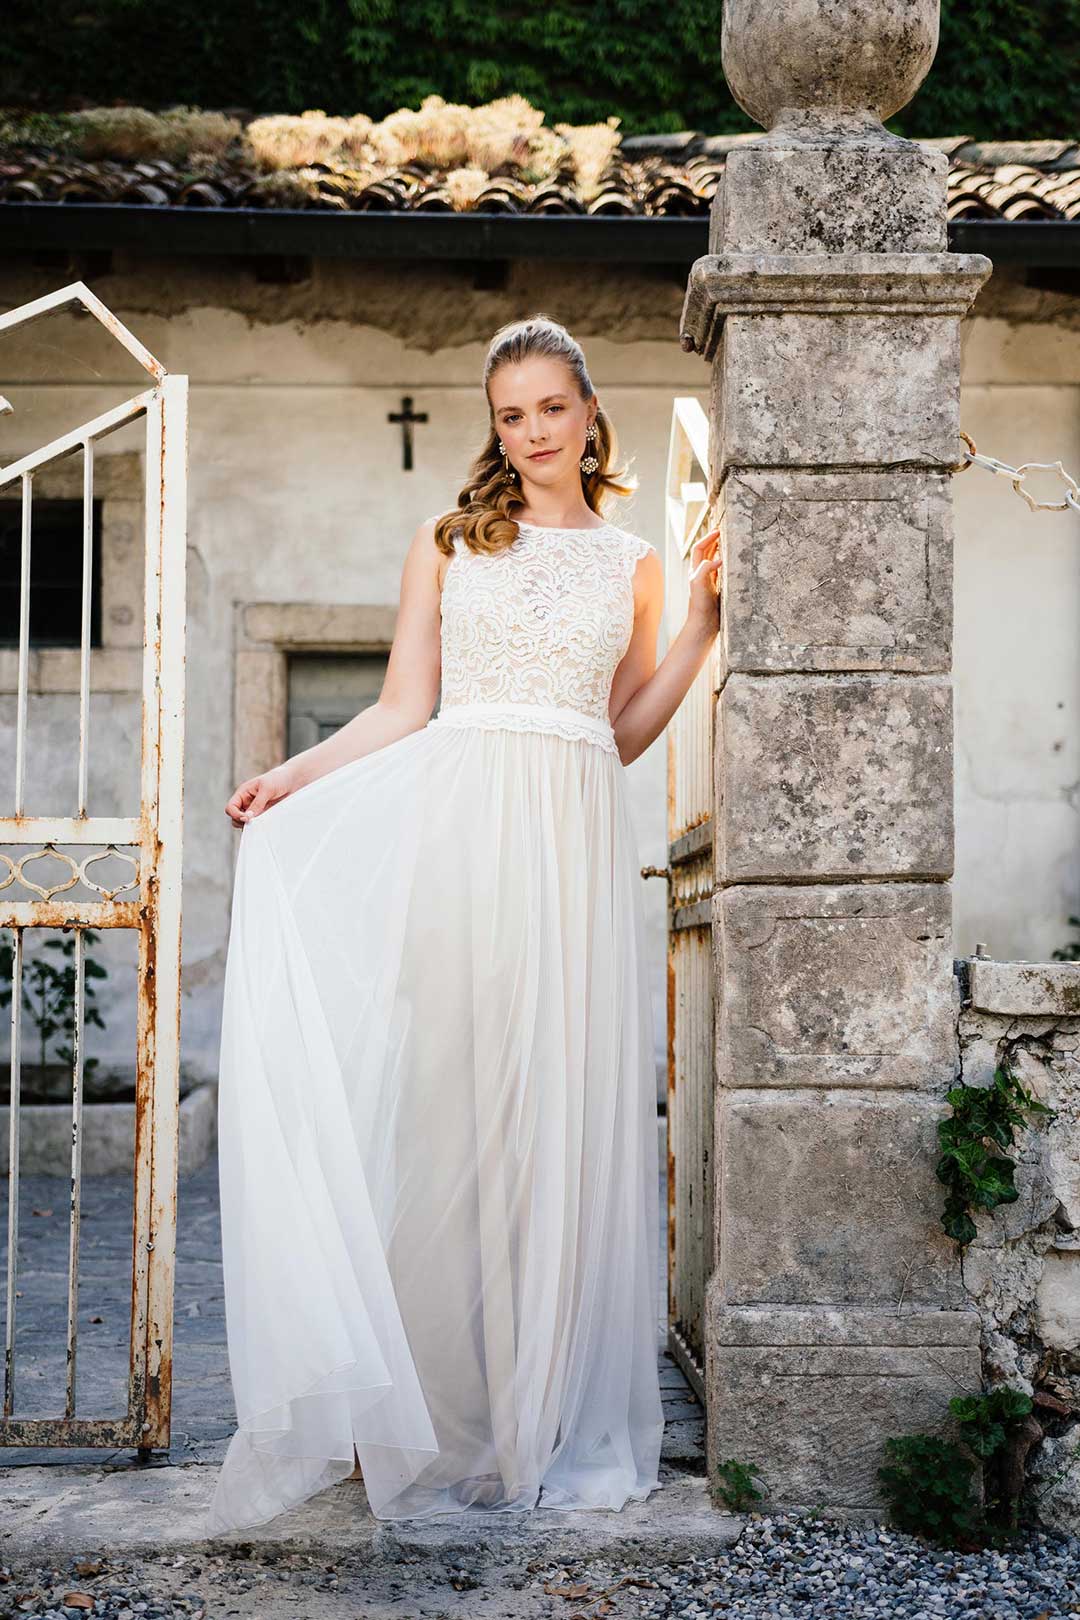 5 things to look out for in your wedding dress - 5 things to look out for in your wedding dress